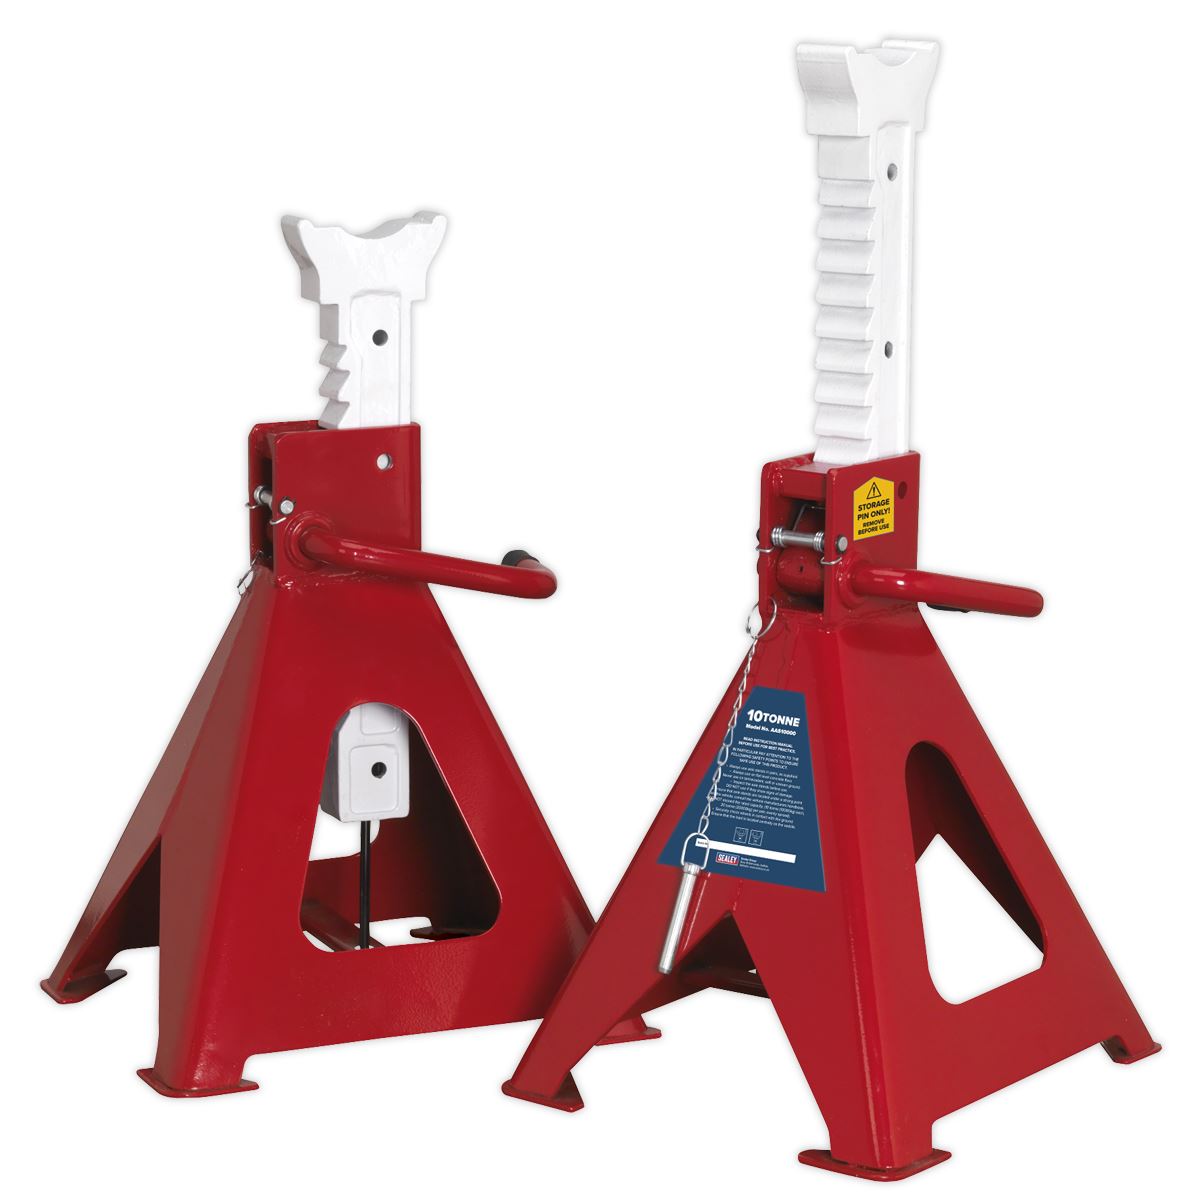 Sealey Auto Rise Ratchet Axle Stands (Pair) 10 Tonne Capacity per Stand